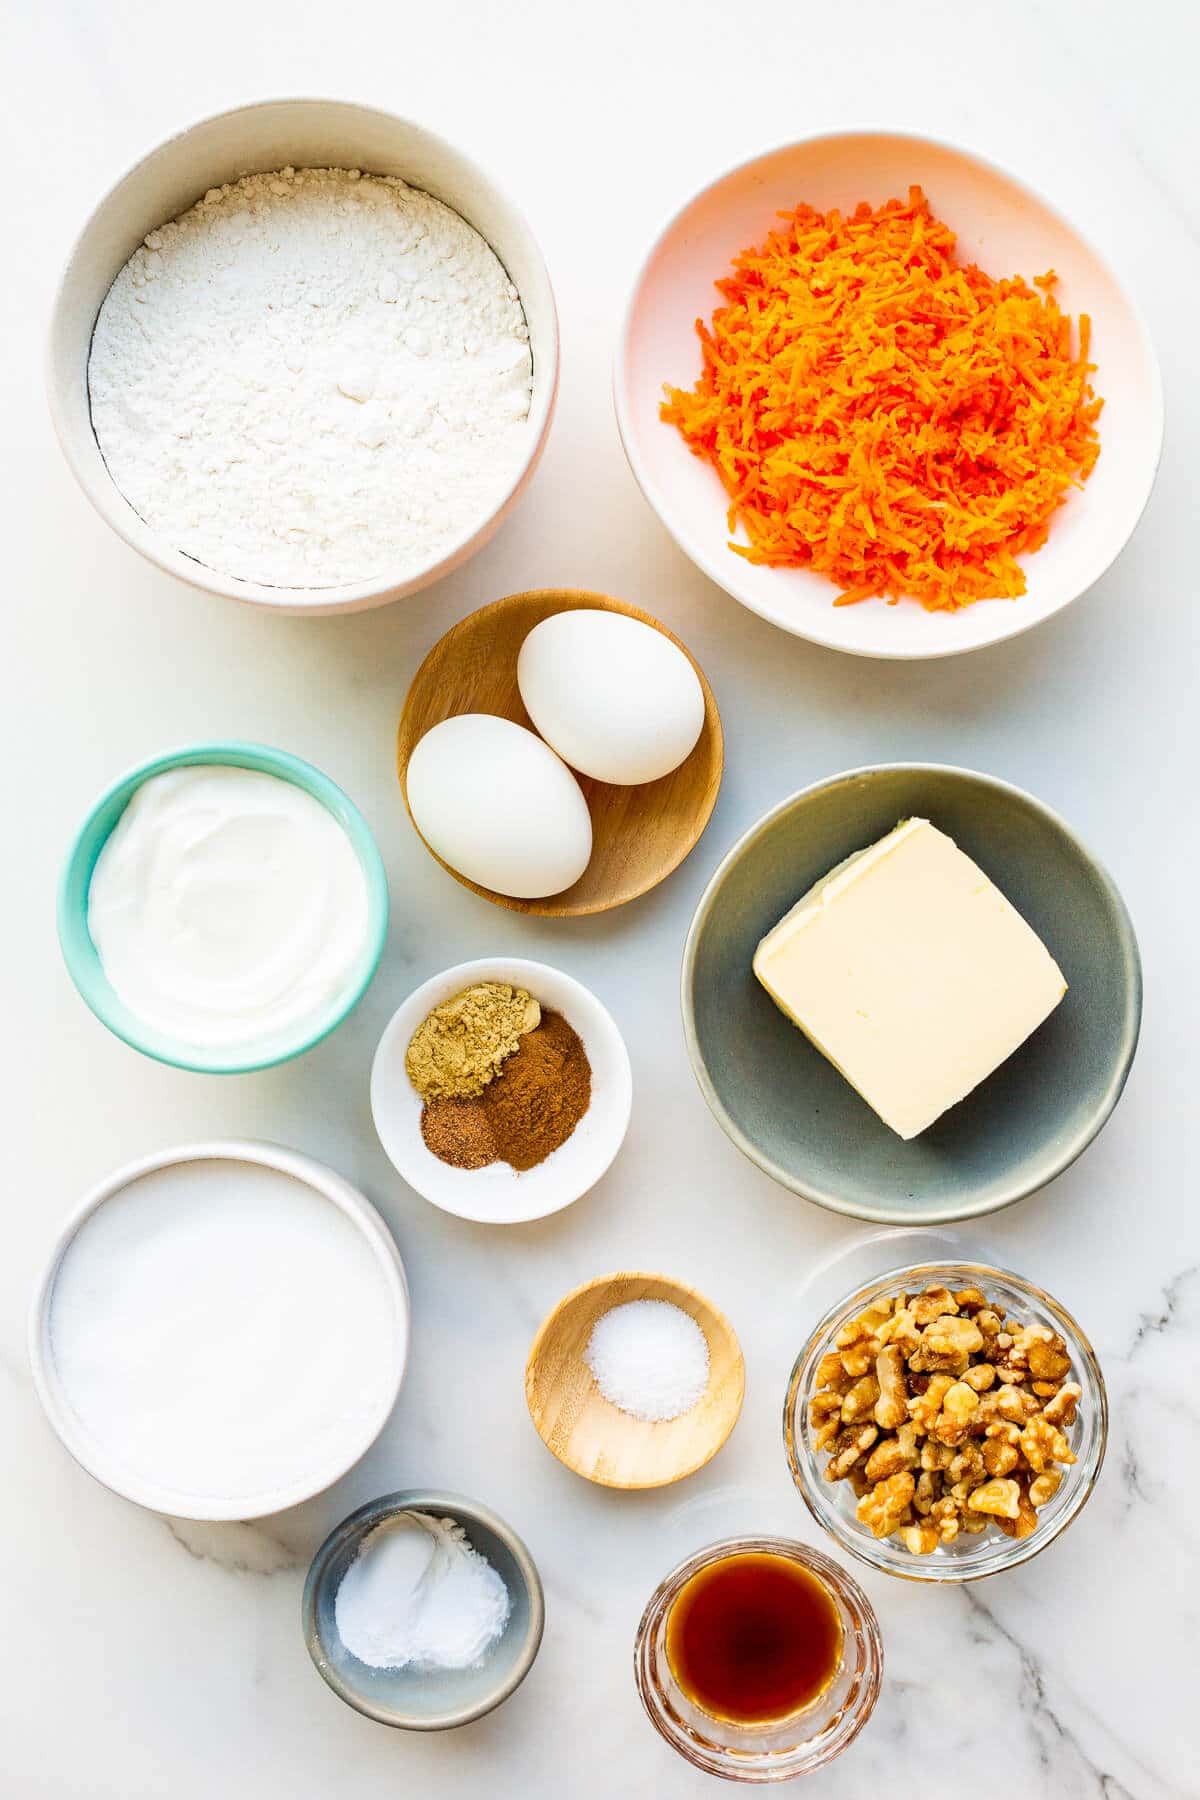 Ingredients measured out to make easy carrot muffins with walnuts and sour cream, ready to be mixed.